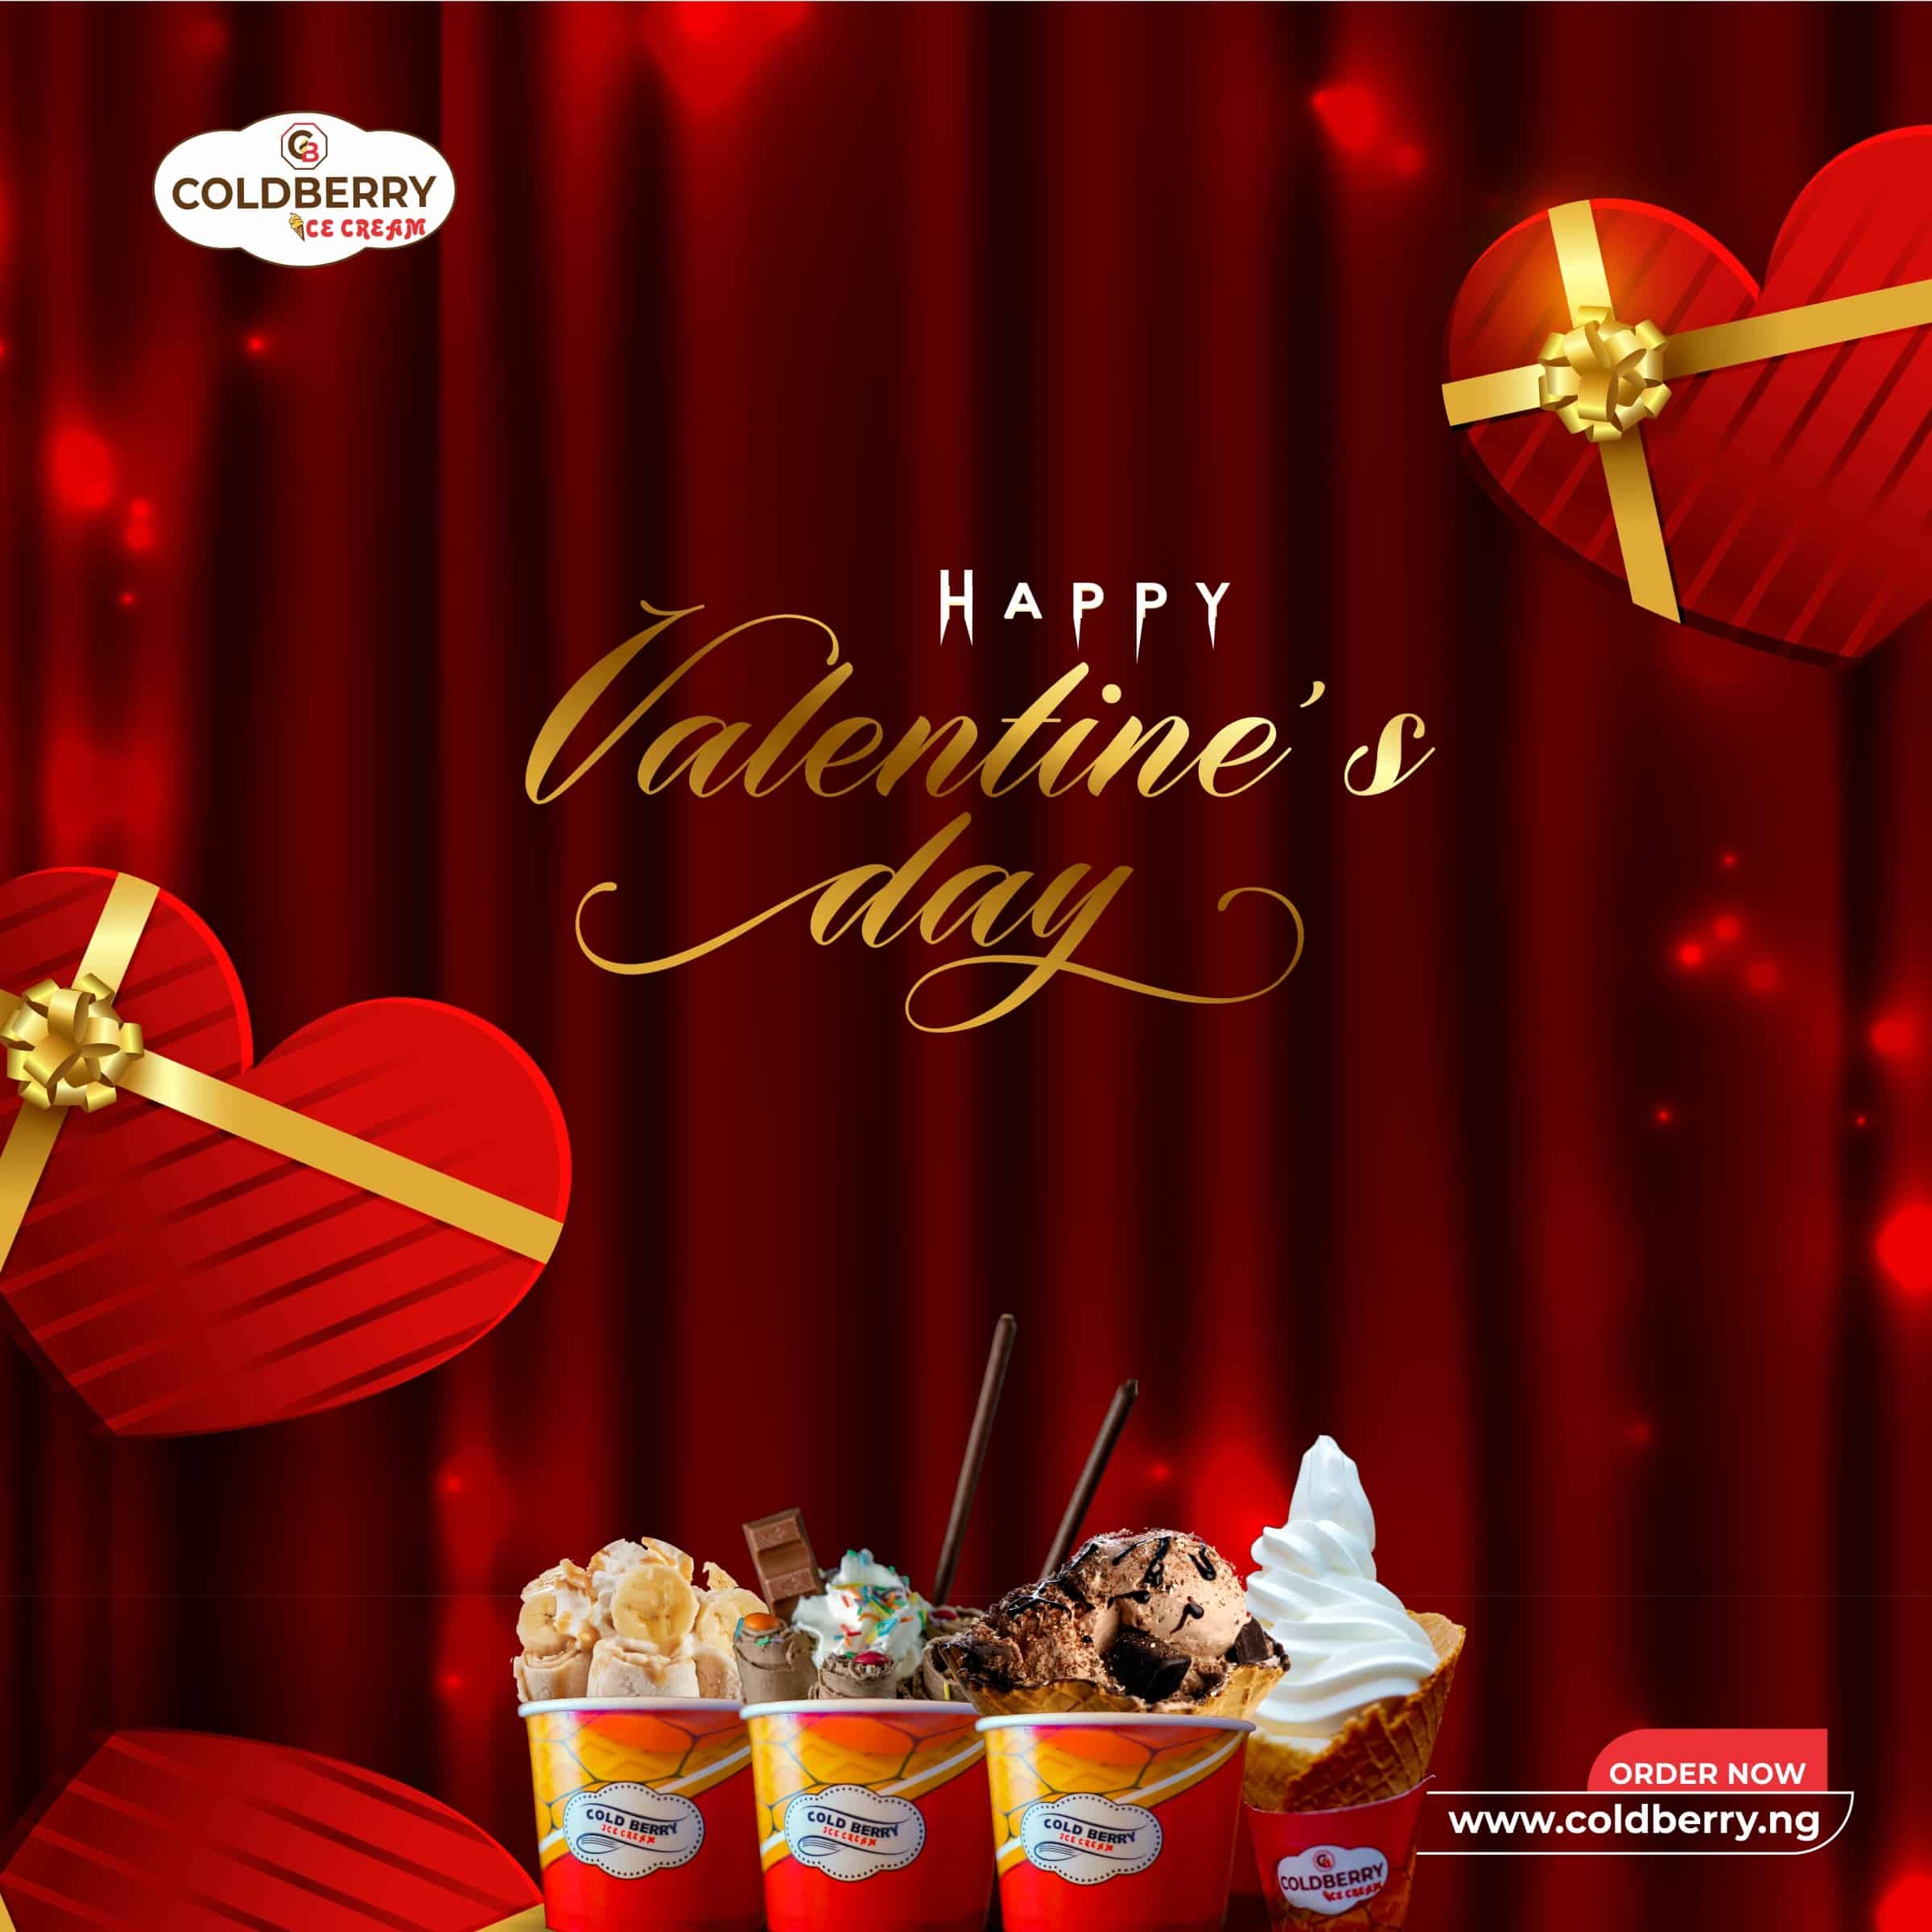 Get All the Love and Ice Cream for Valentine’s Day 2022